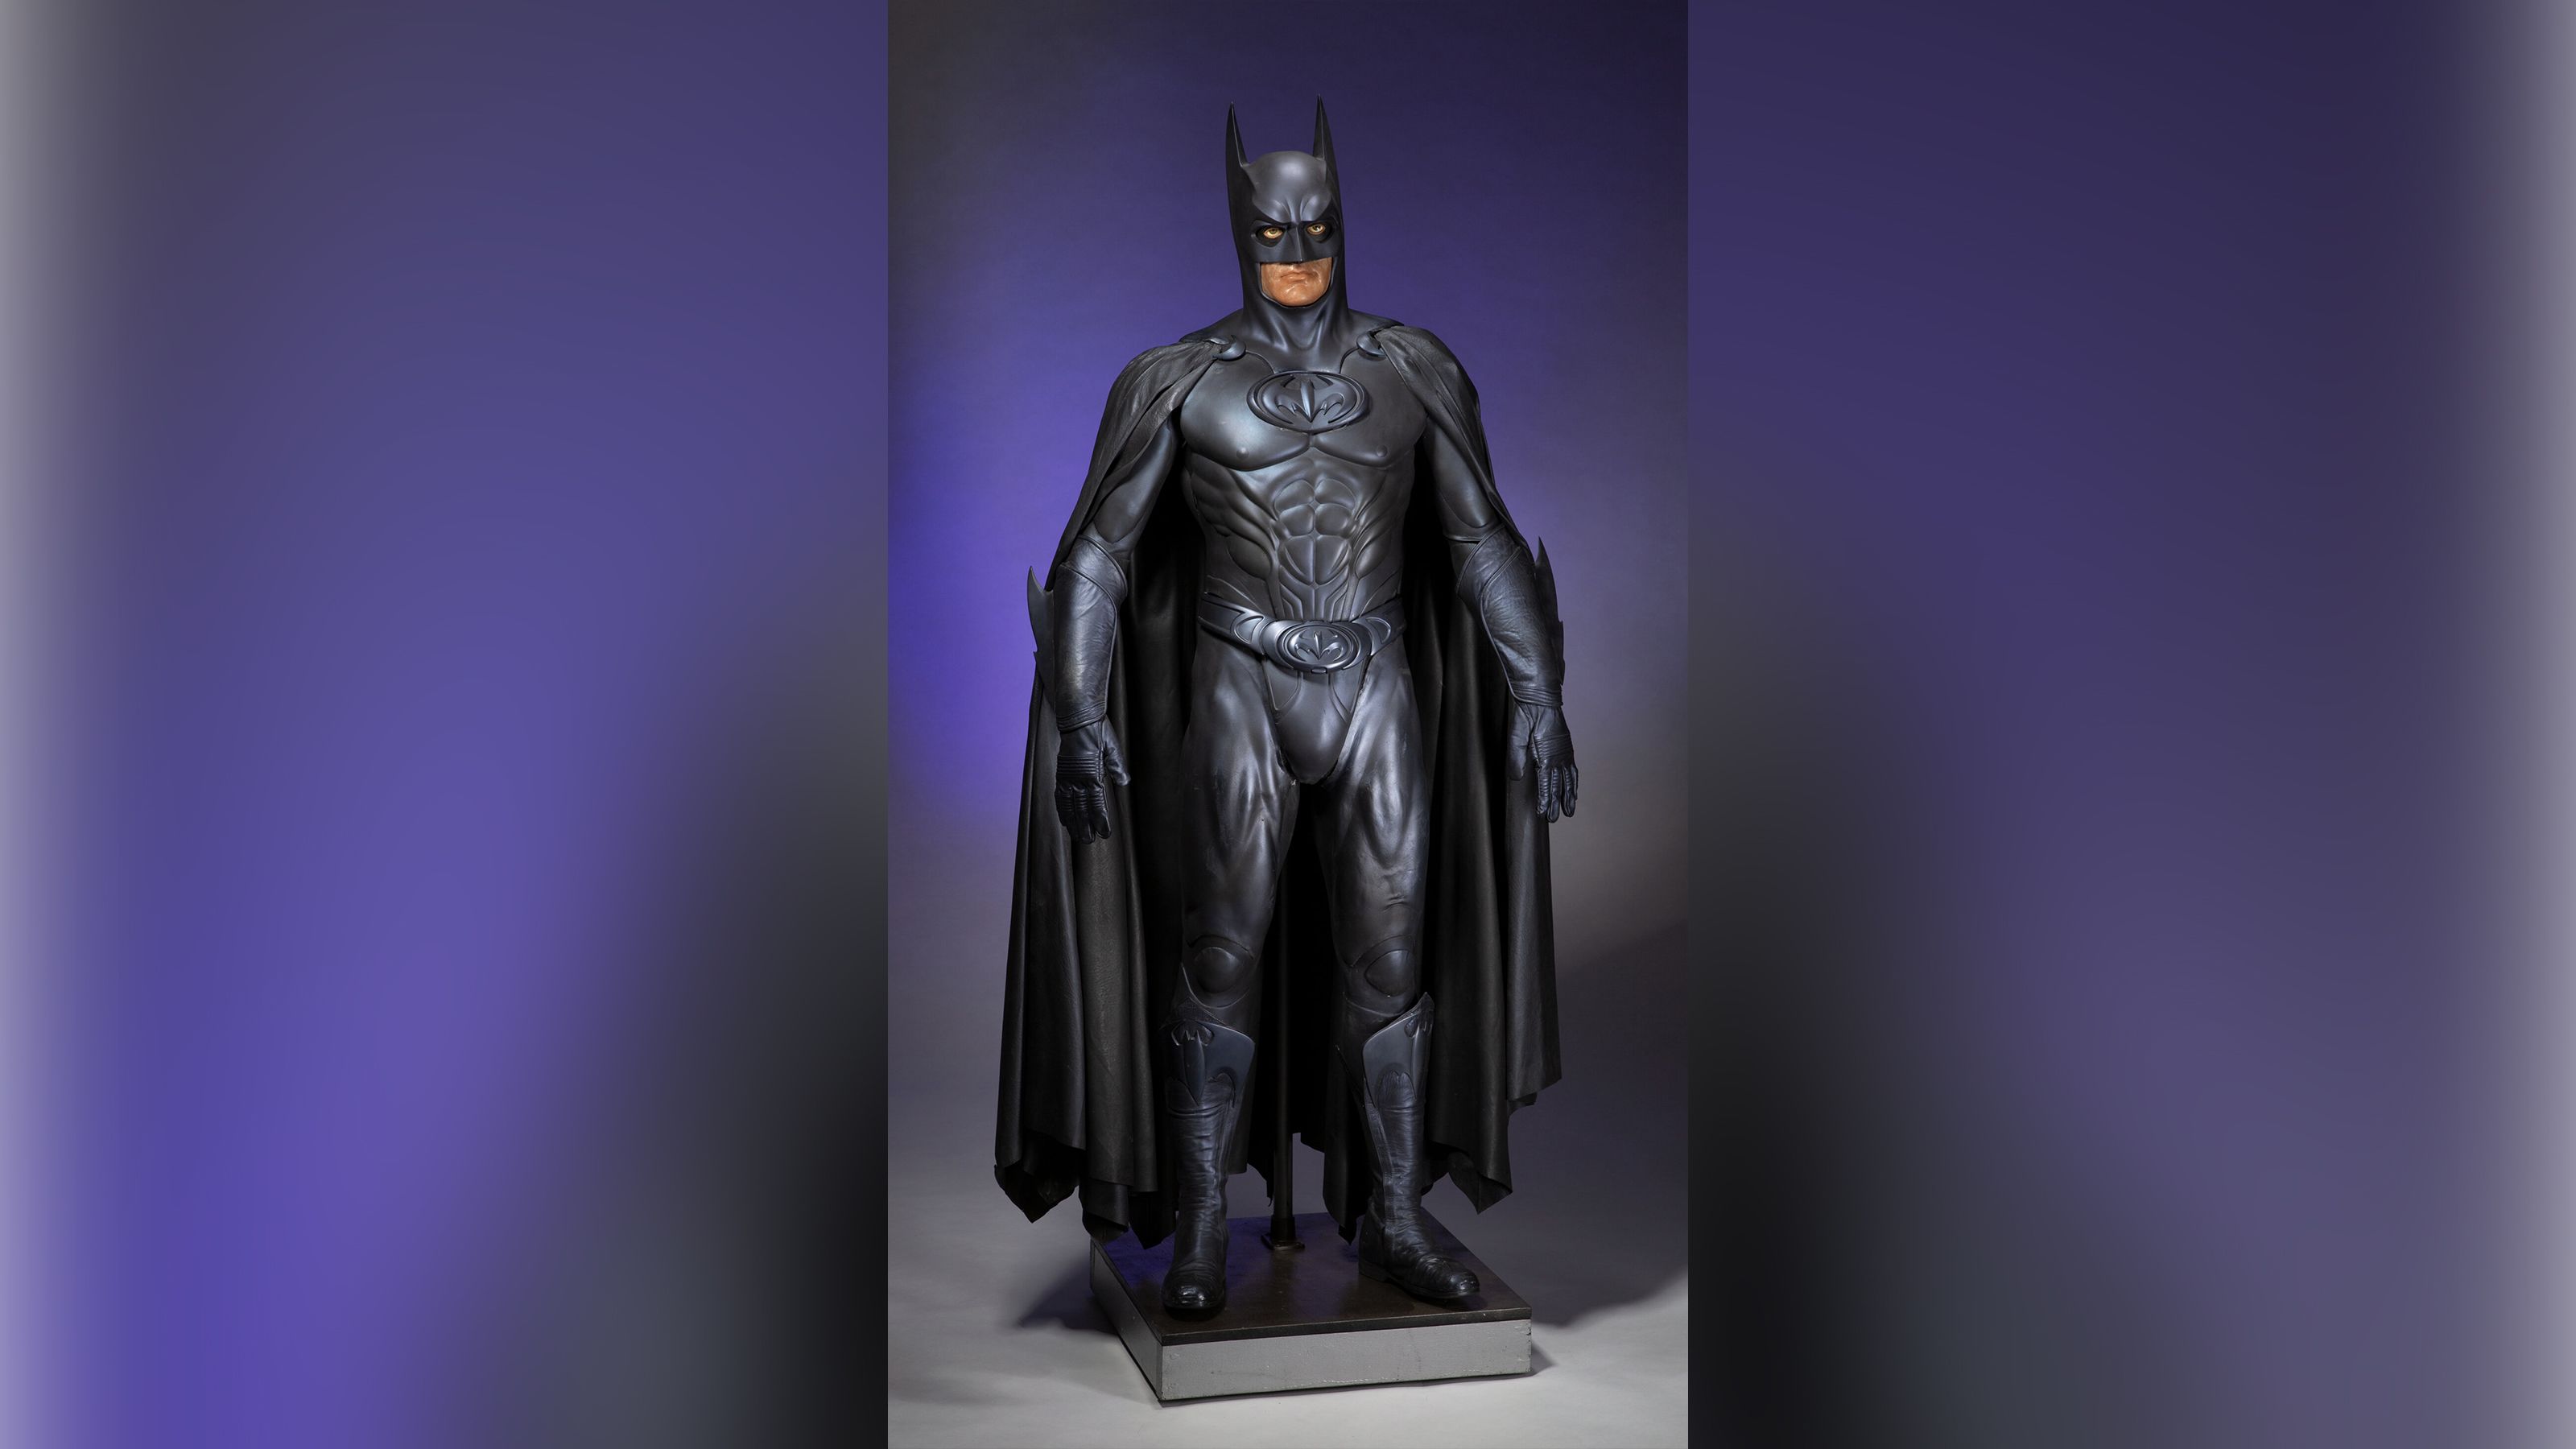 You can now buy George Clooney's infamous 'Batman' costume